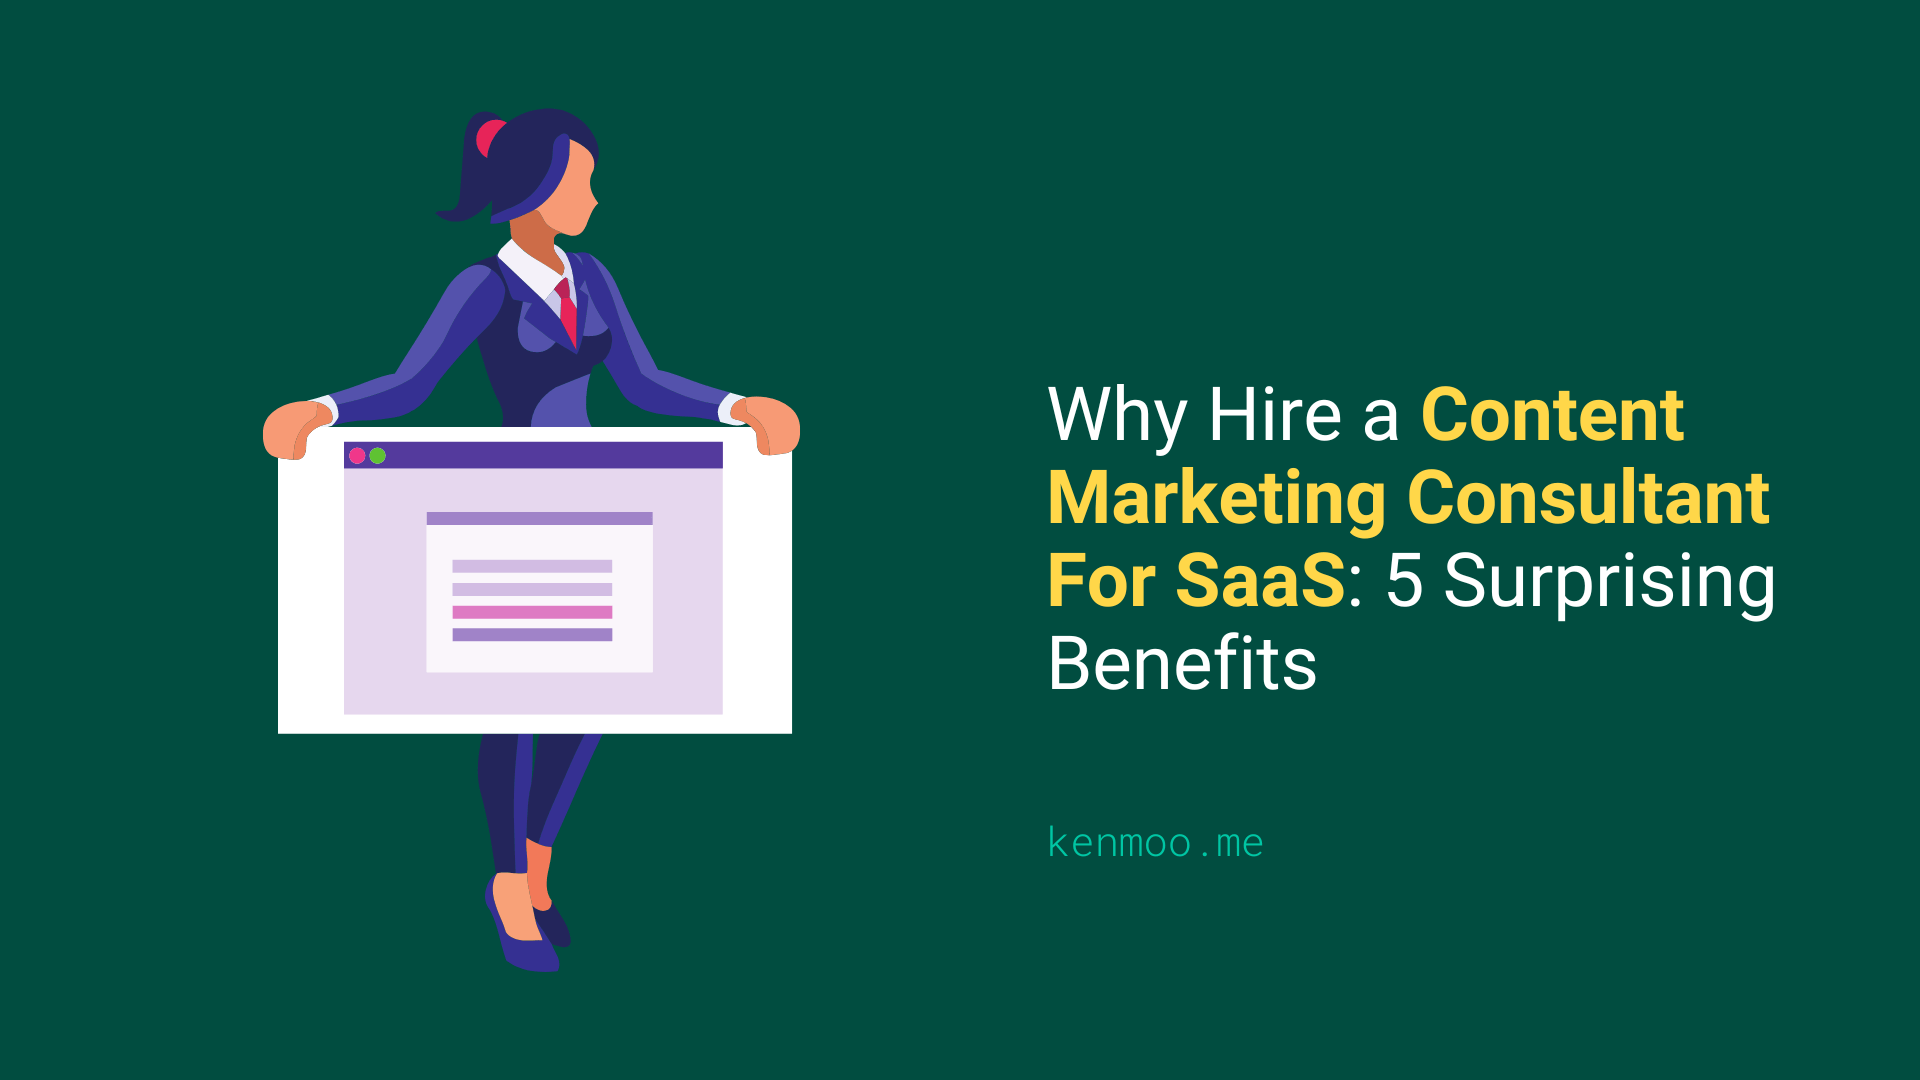 Why Hire a Content Marketing Consultant For SaaS: 5 Surprising Benefits